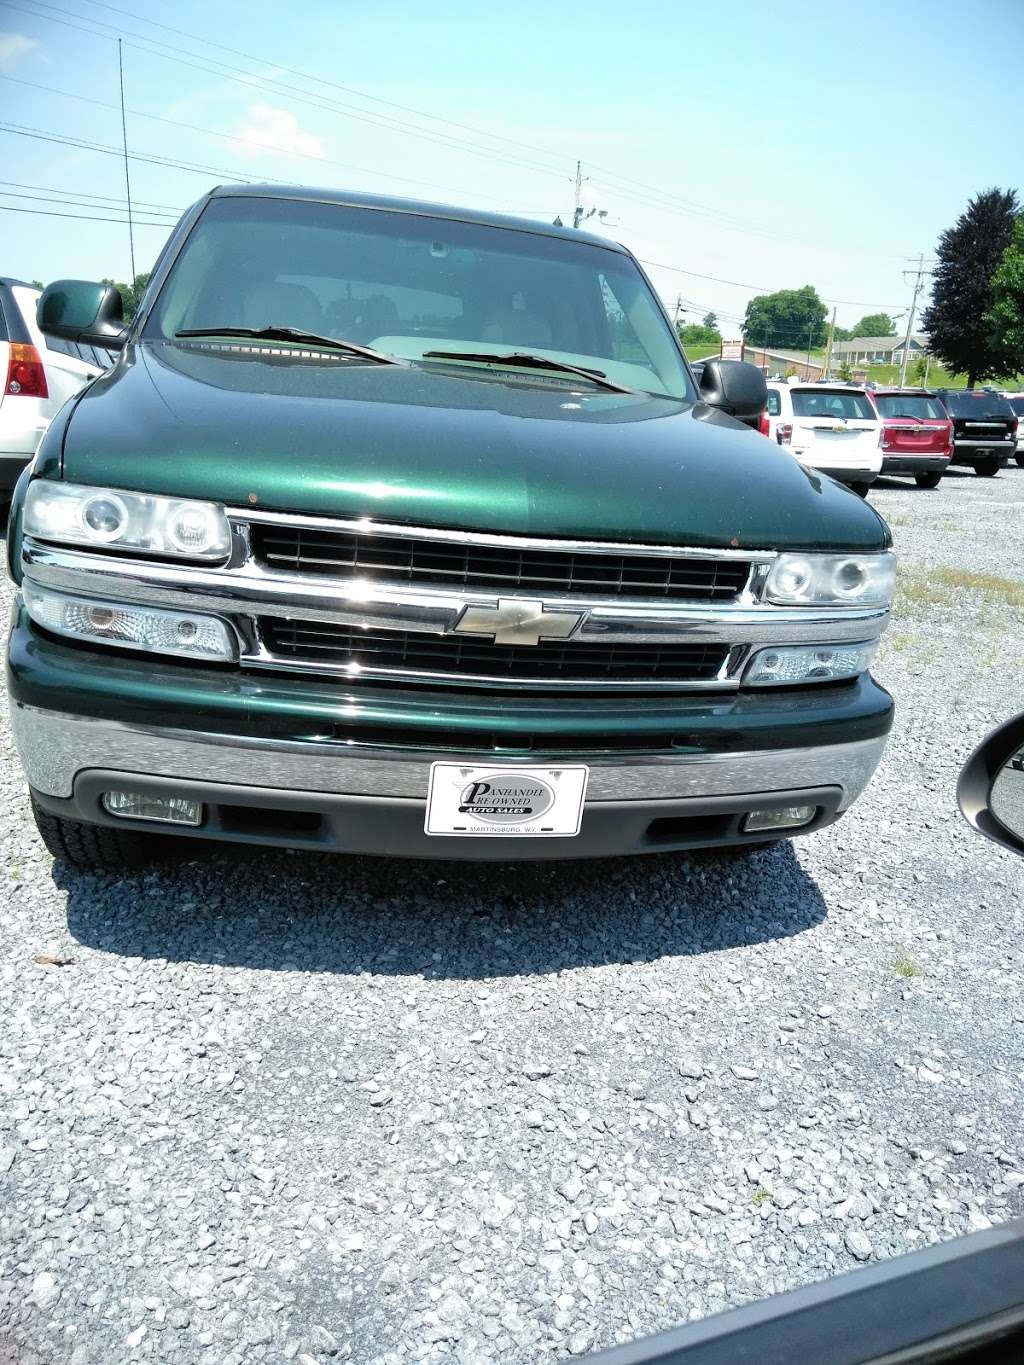 Panhandle Pre-Owned Autos, Inc. | 2568 Hedgesville Rd, Martinsburg, WV 25403, USA | Phone: (304) 754-5227